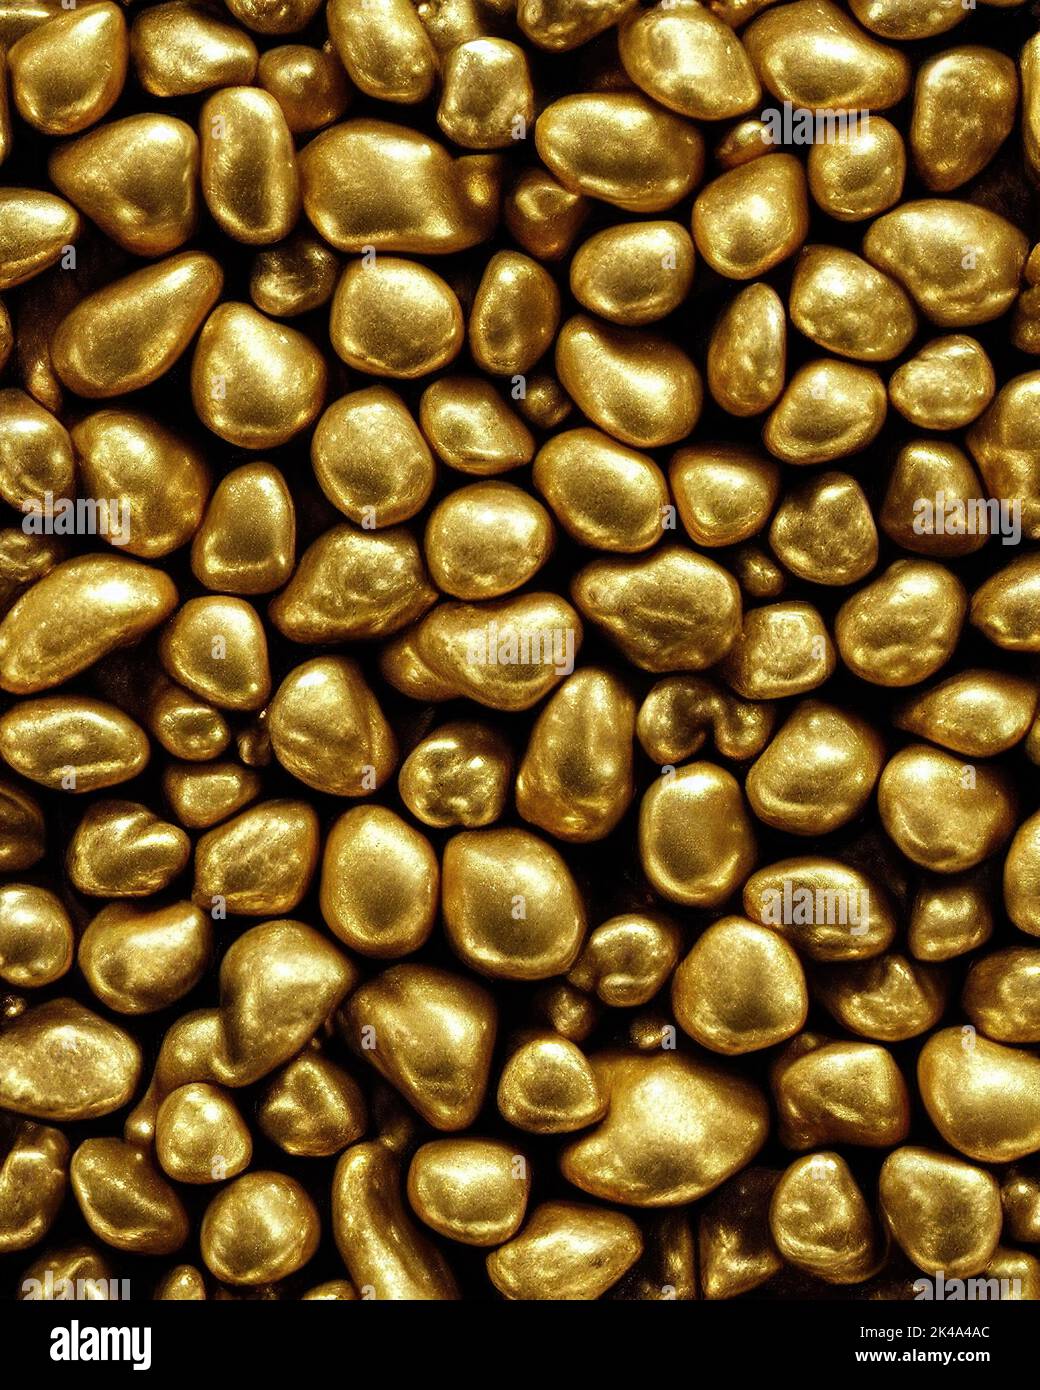 3,627 Raw Gold Nugget Images, Stock Photos, 3D objects, & Vectors